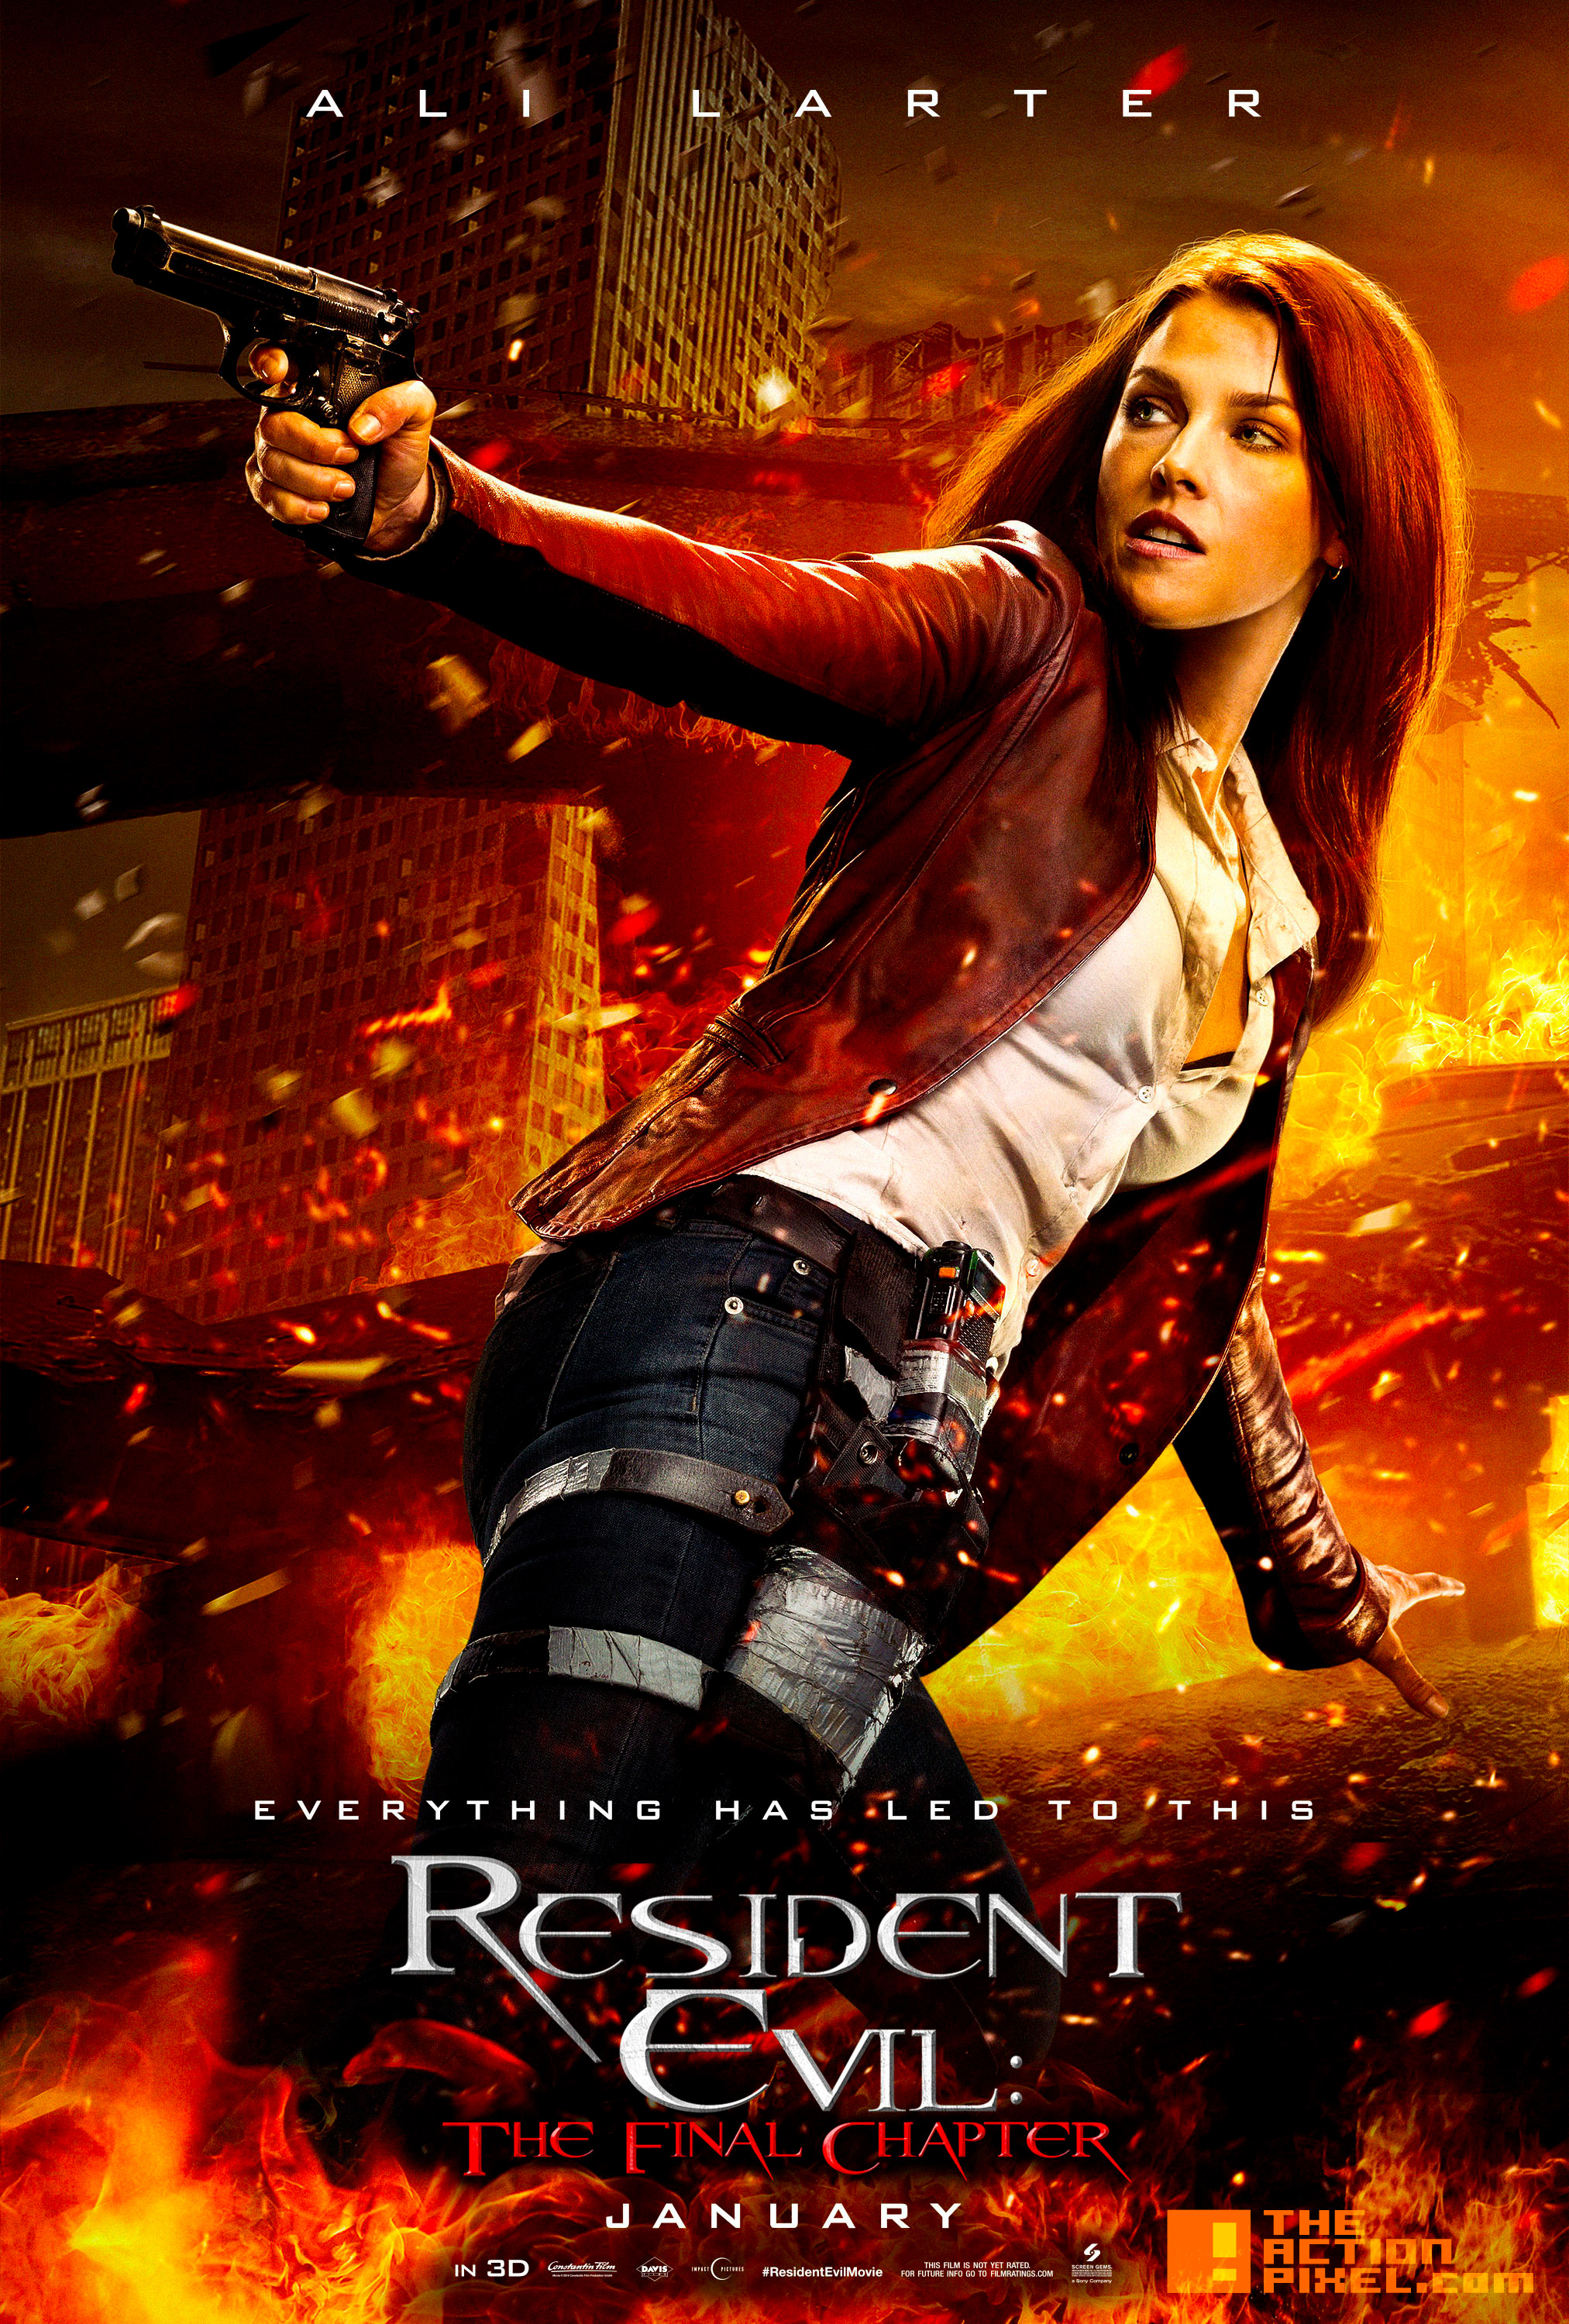 New “Resident Evil: The Final Chapter” film posters released – The